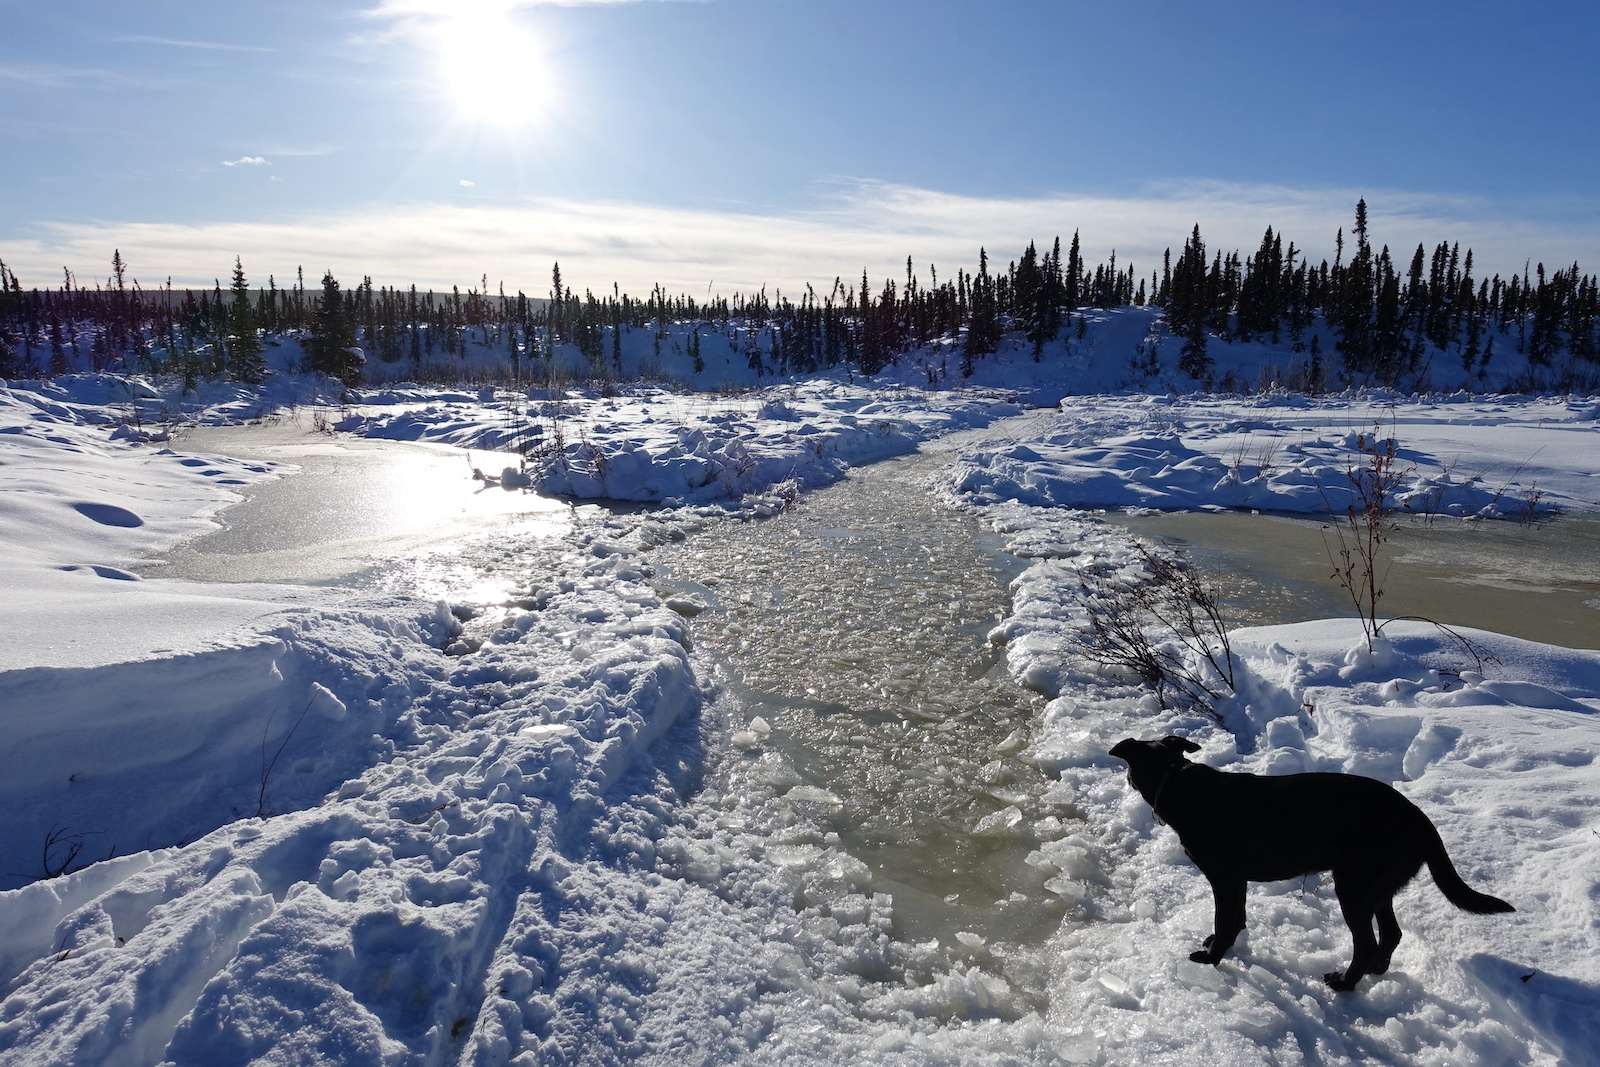 A black dog stands by a trail in the snow that passes through a puddle filled with chunks of ice. In the background is a high bank on which spruce trees grow.